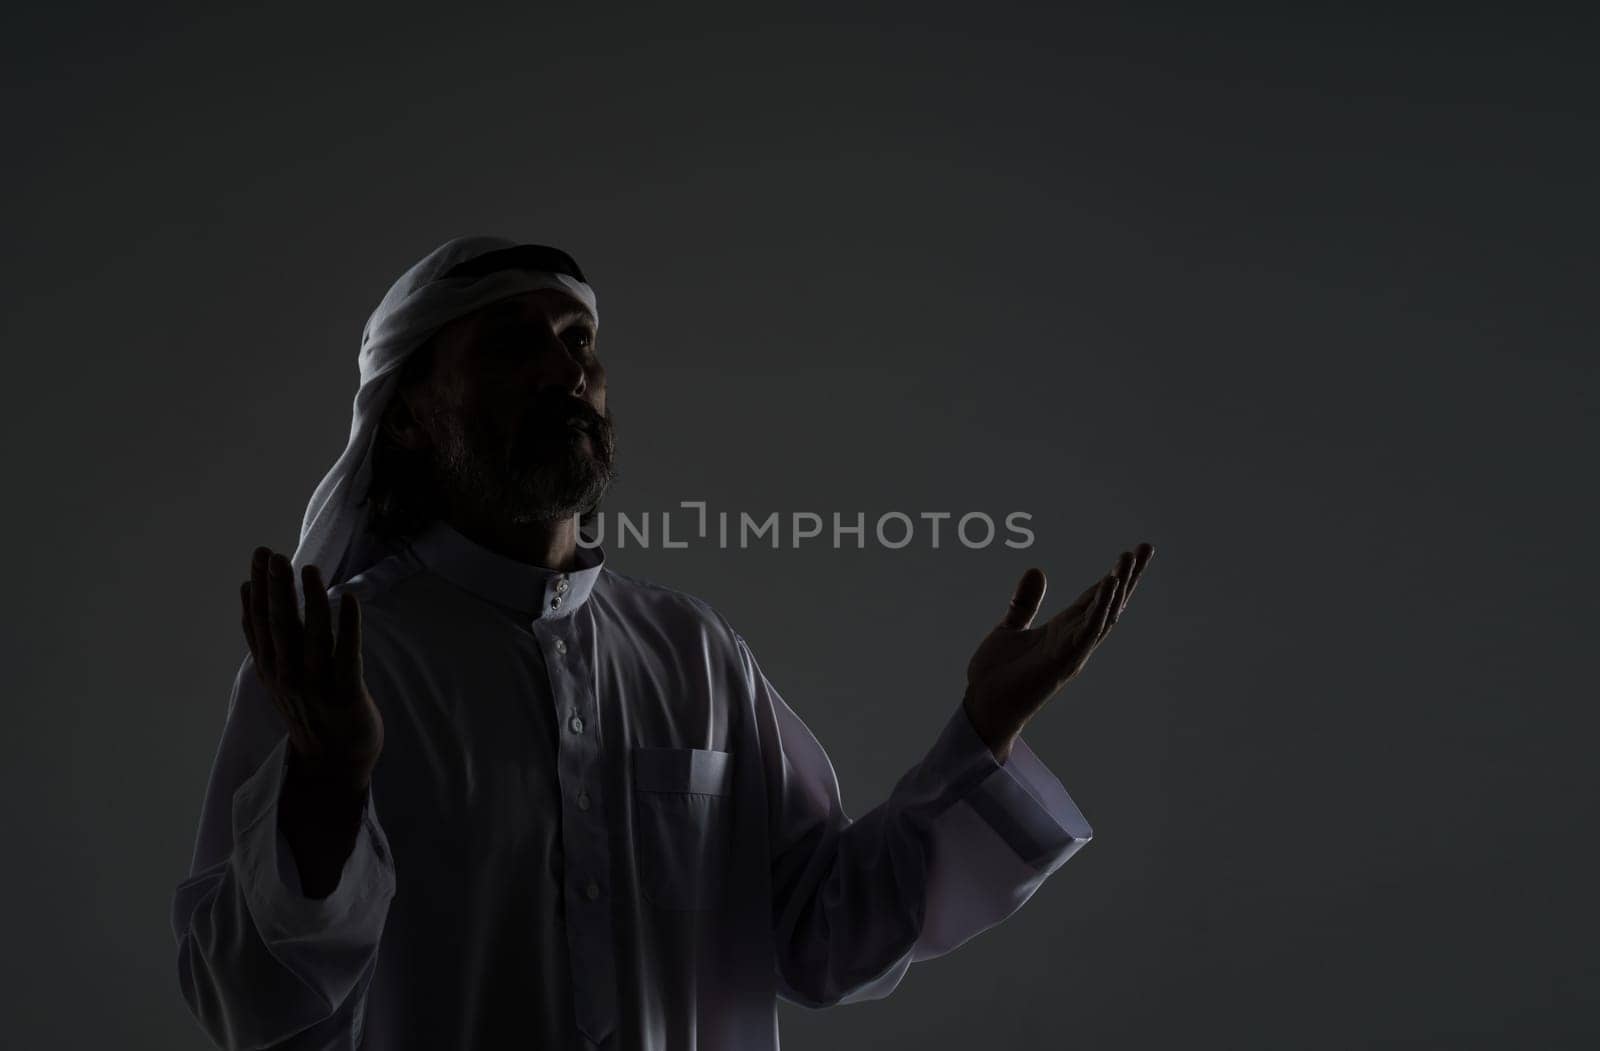 Muslim Arab man captures his spiritual devotion and faith as he prays, with hands raised to face in contemplation. Copy space for designers and publishers, black and white mid-length portrait by LipikStockMedia